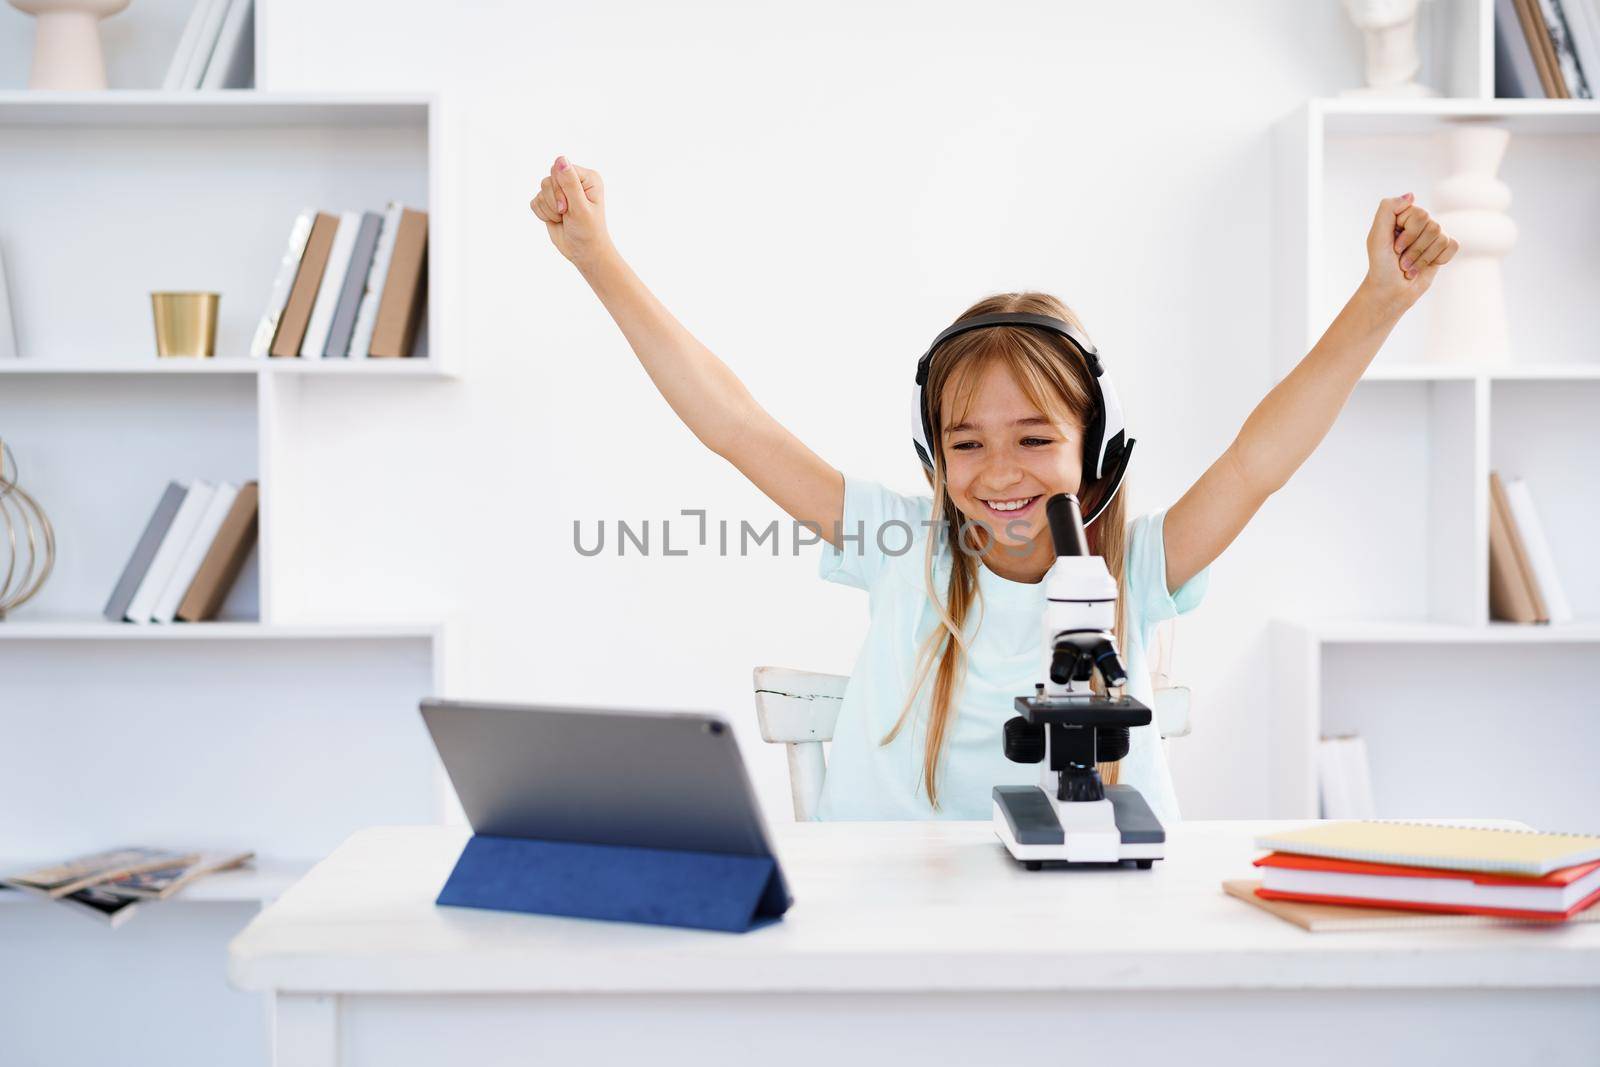 Young girl using microscope during online lesson education at home by Fabrikasimf